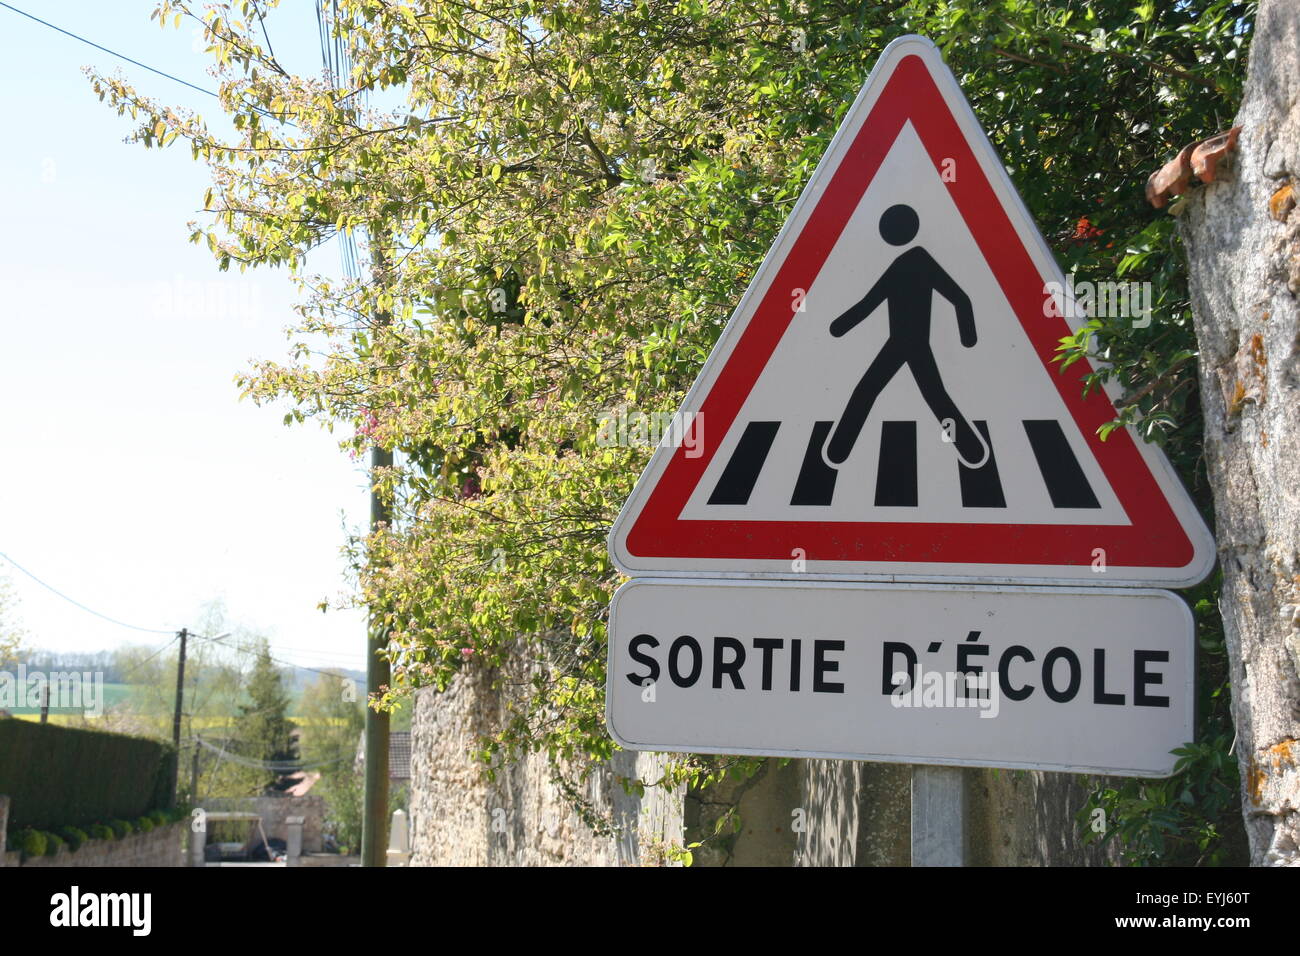 School crossing sign, Champagne region, France. Stock Photo